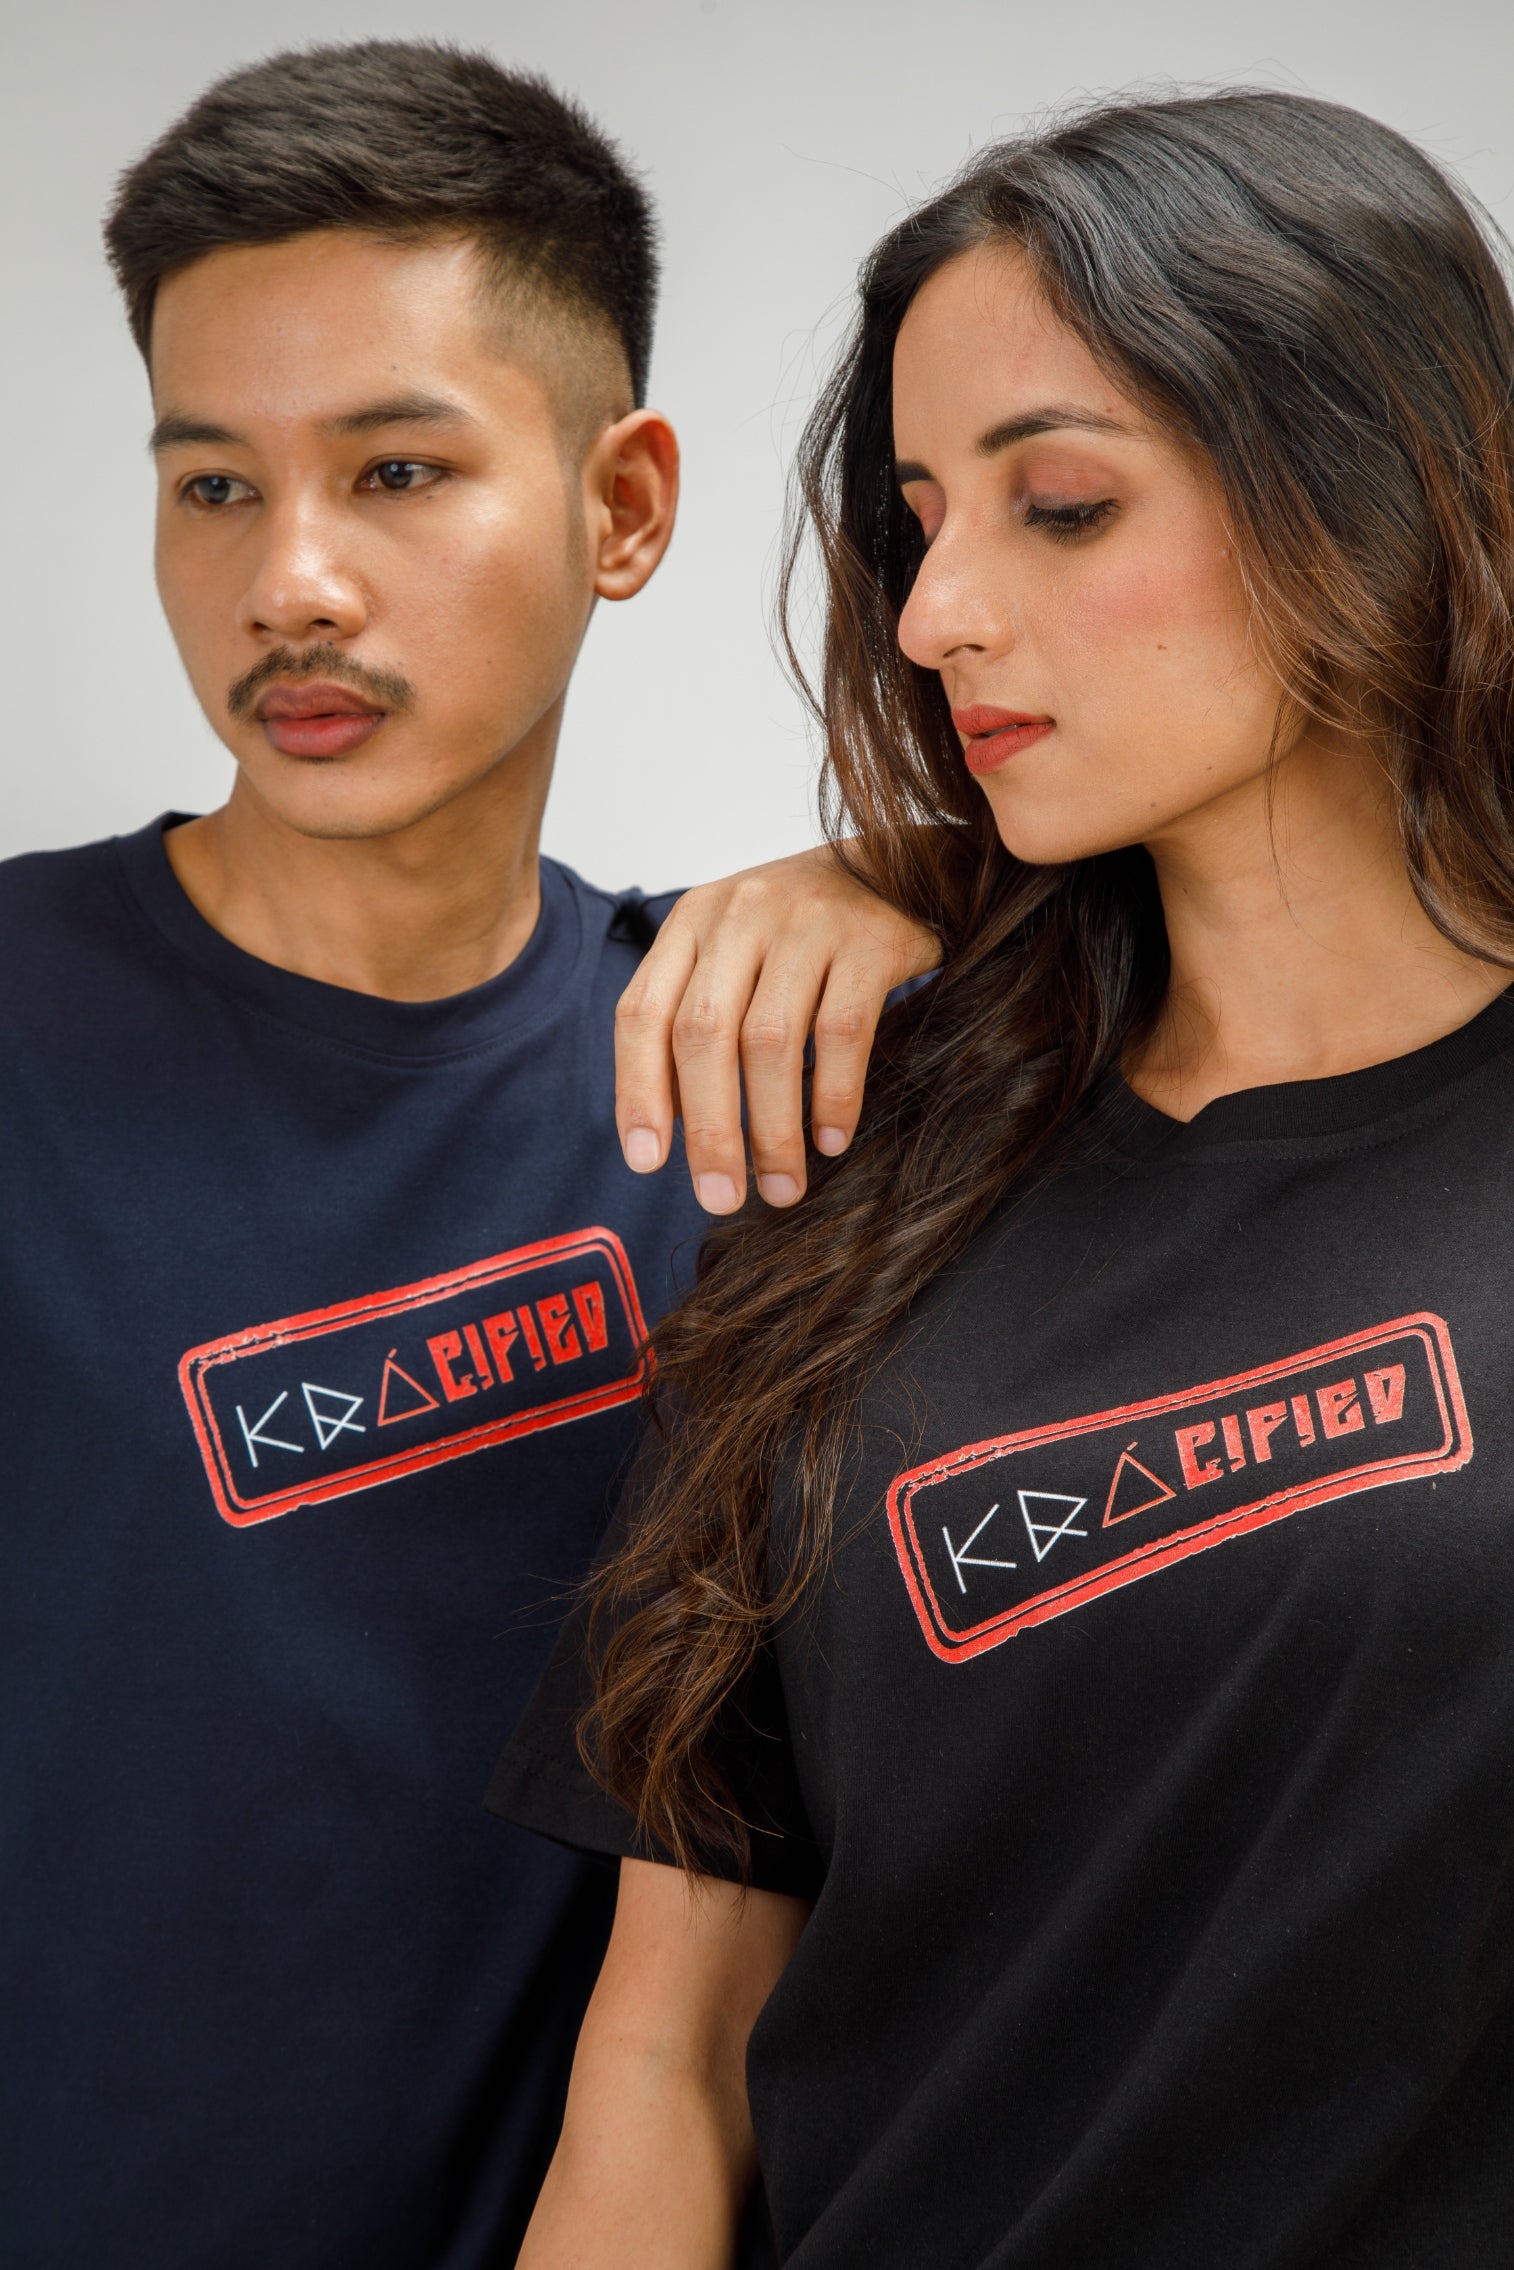 Kracified Stamped Unisex T-Shirt